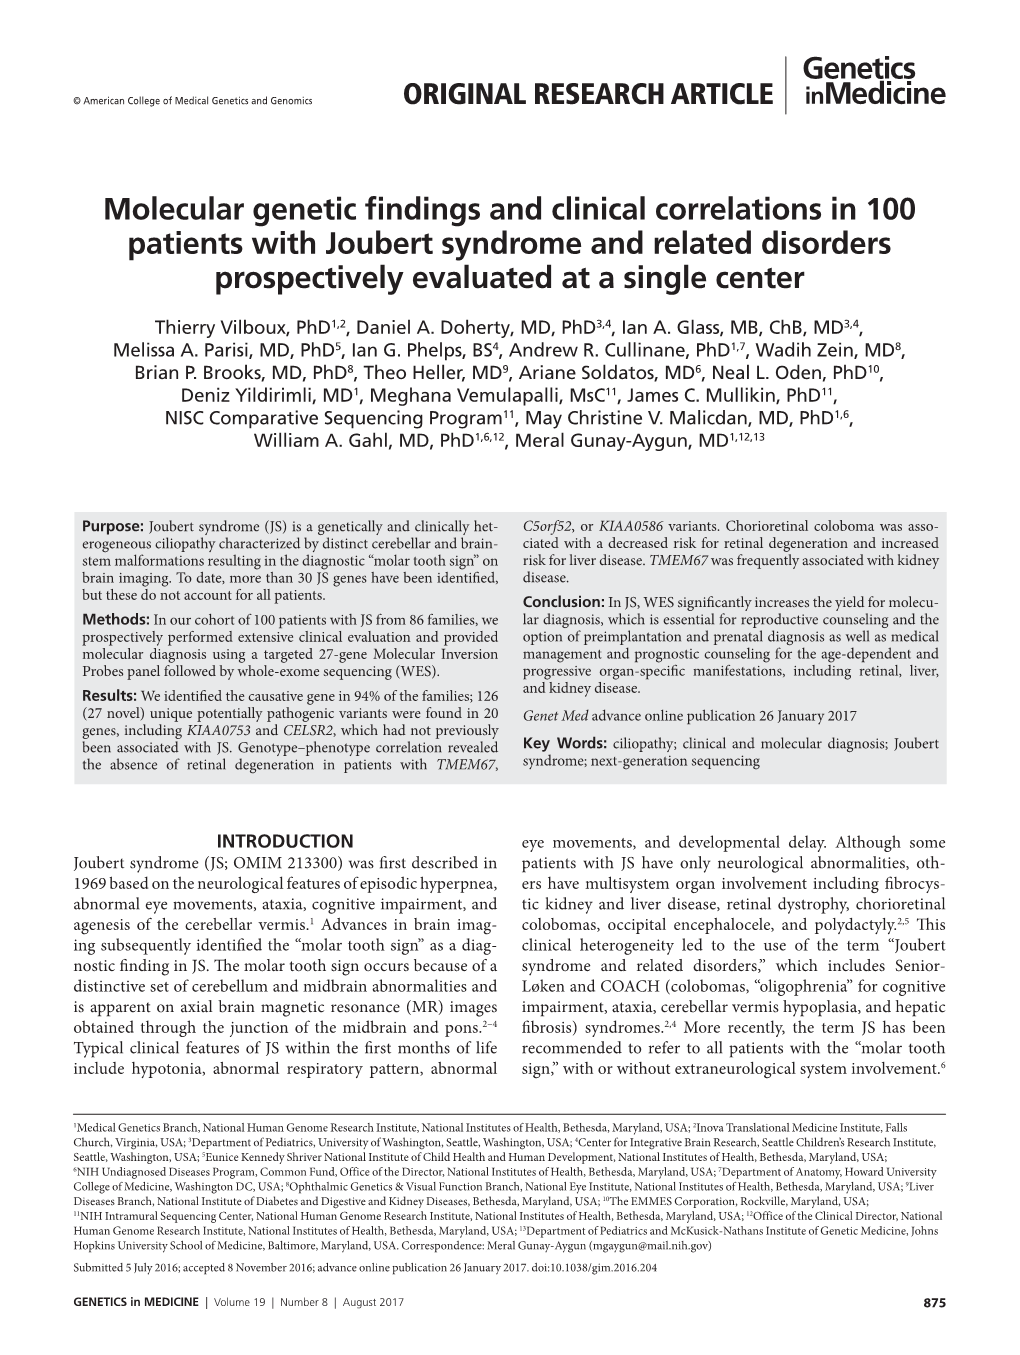 Molecular Genetic Findings and Clinical Correlations in 100 Patients with Joubert Syndrome and Related Disorders Prospectively Evaluated at a Single Center